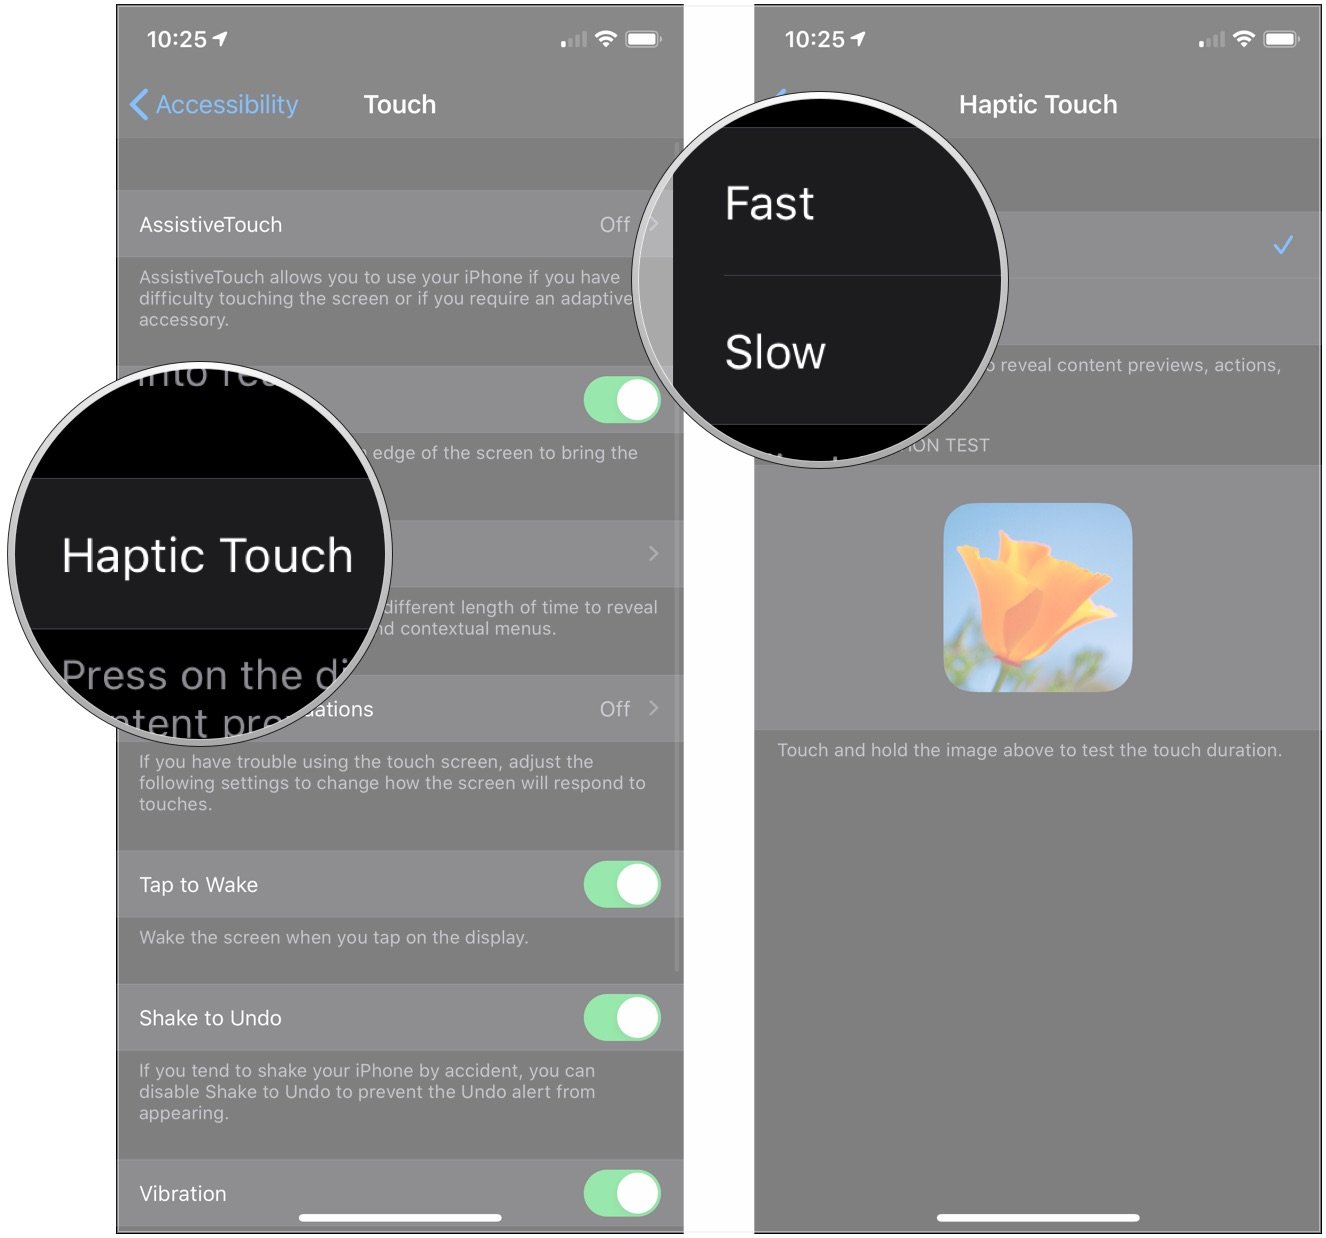 Customize Haptic Touch, showing how to tap Haptic Touch, tap Fast or Slow